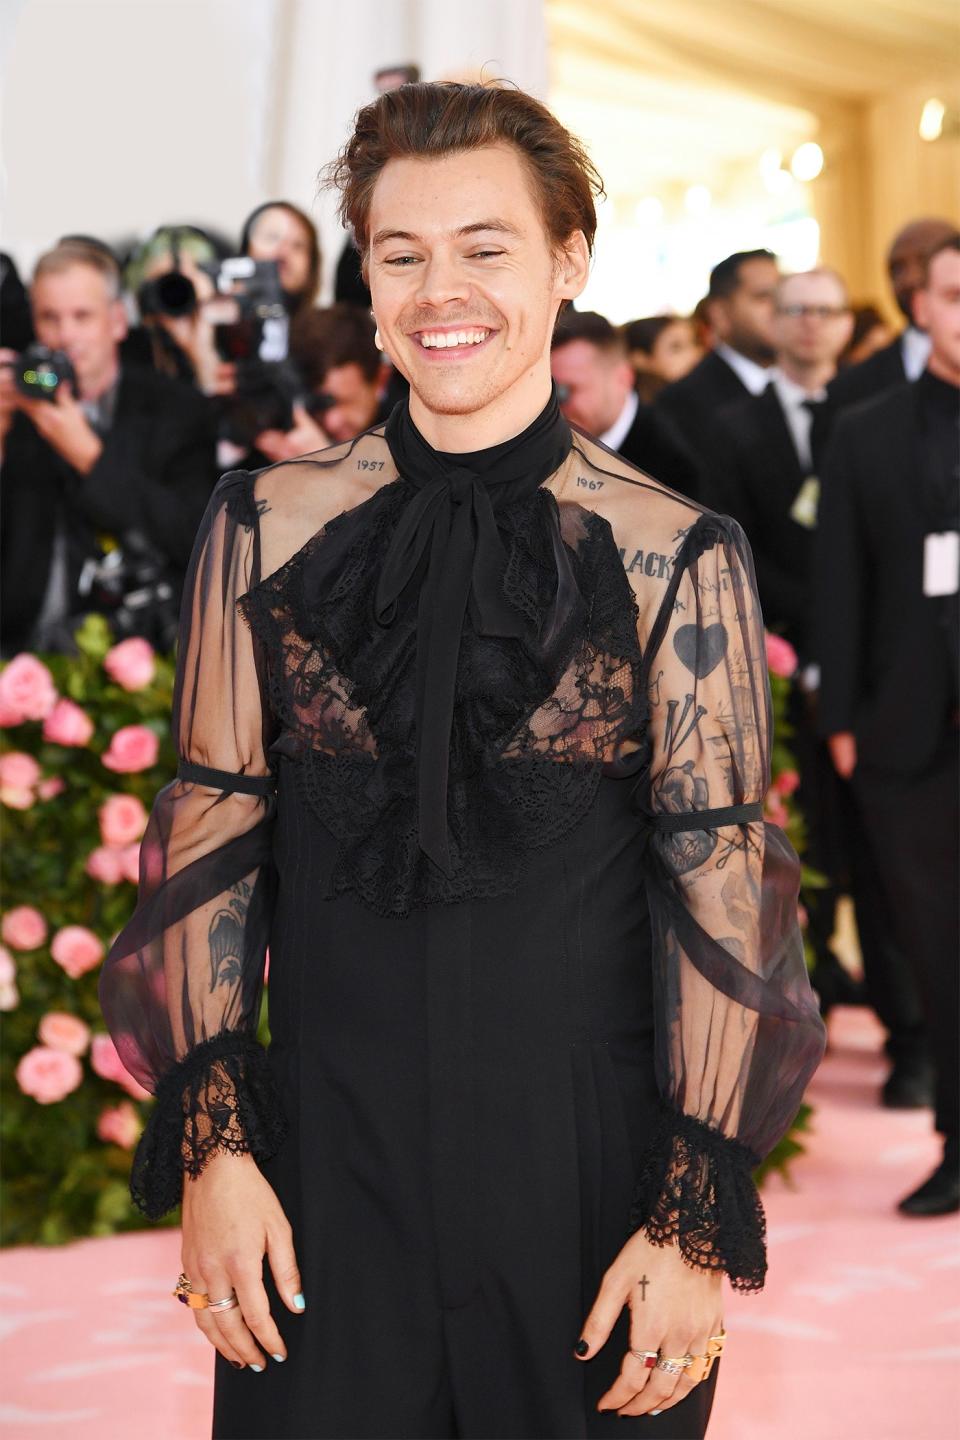 Harry Styles channels the New Romantics at the 2019 Met gala.